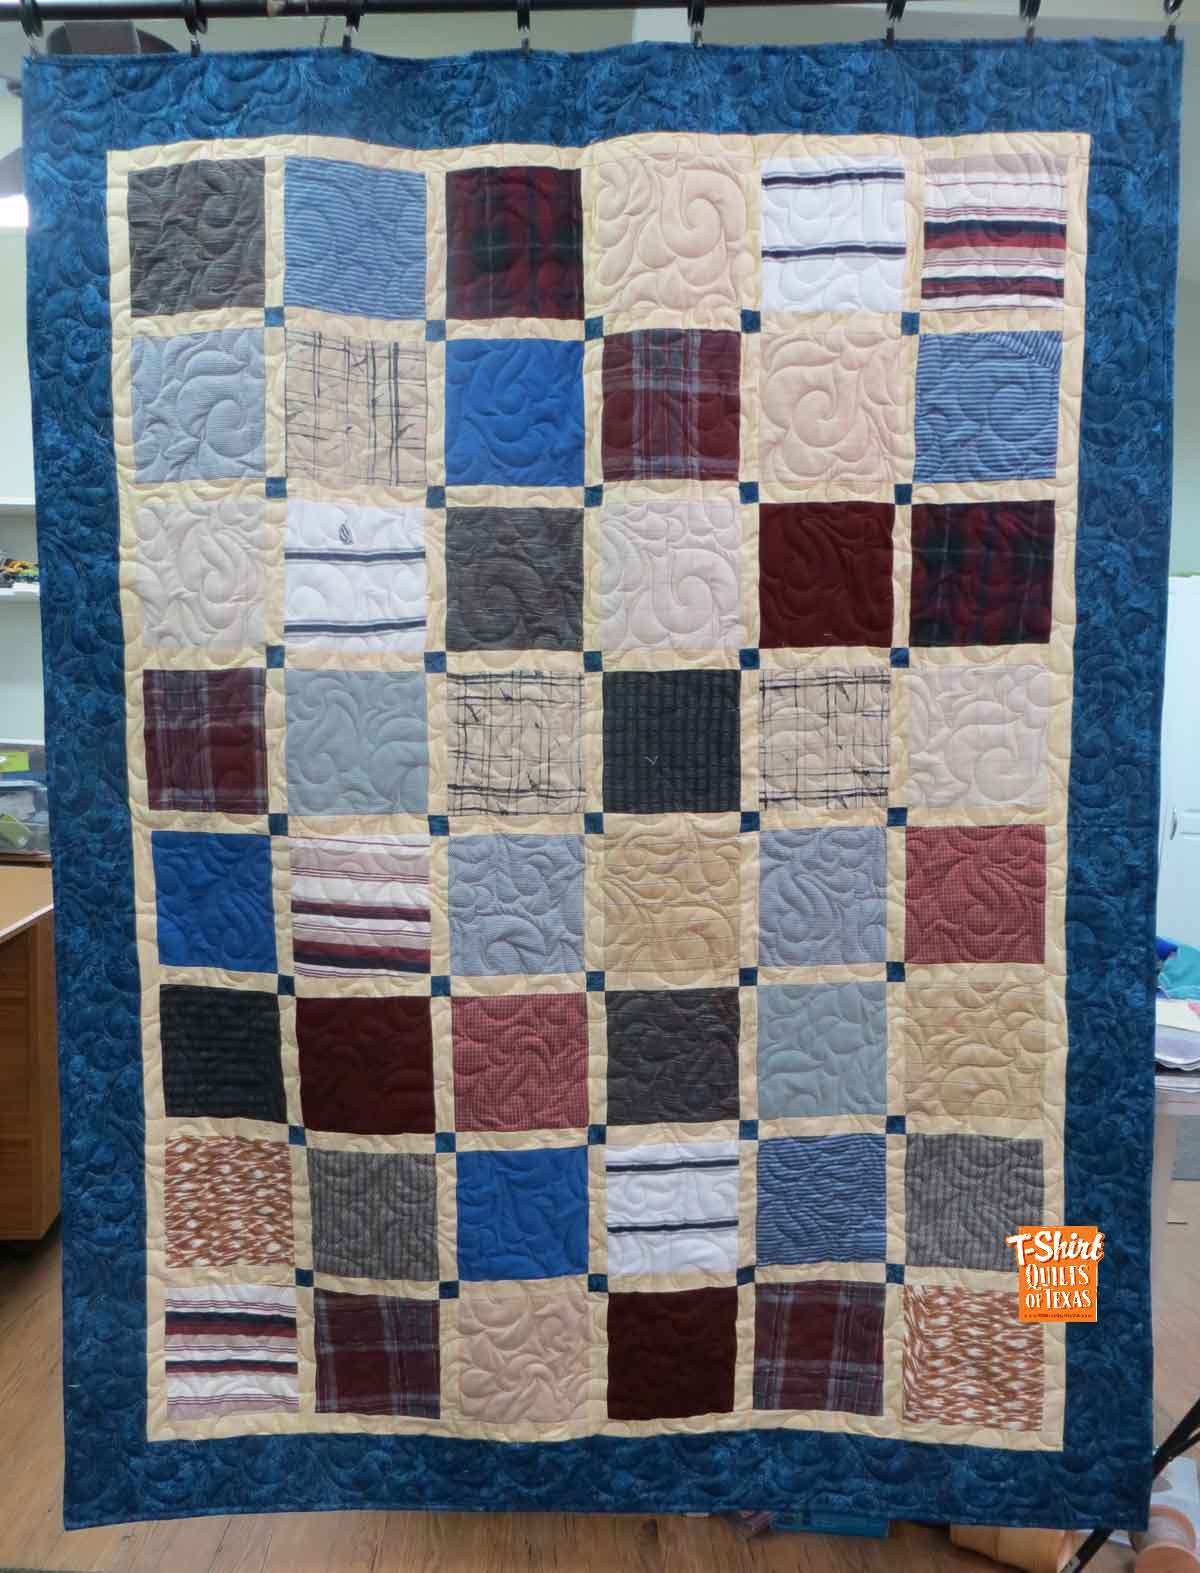 Traditional Memory Quilts made from Clothing in Texas